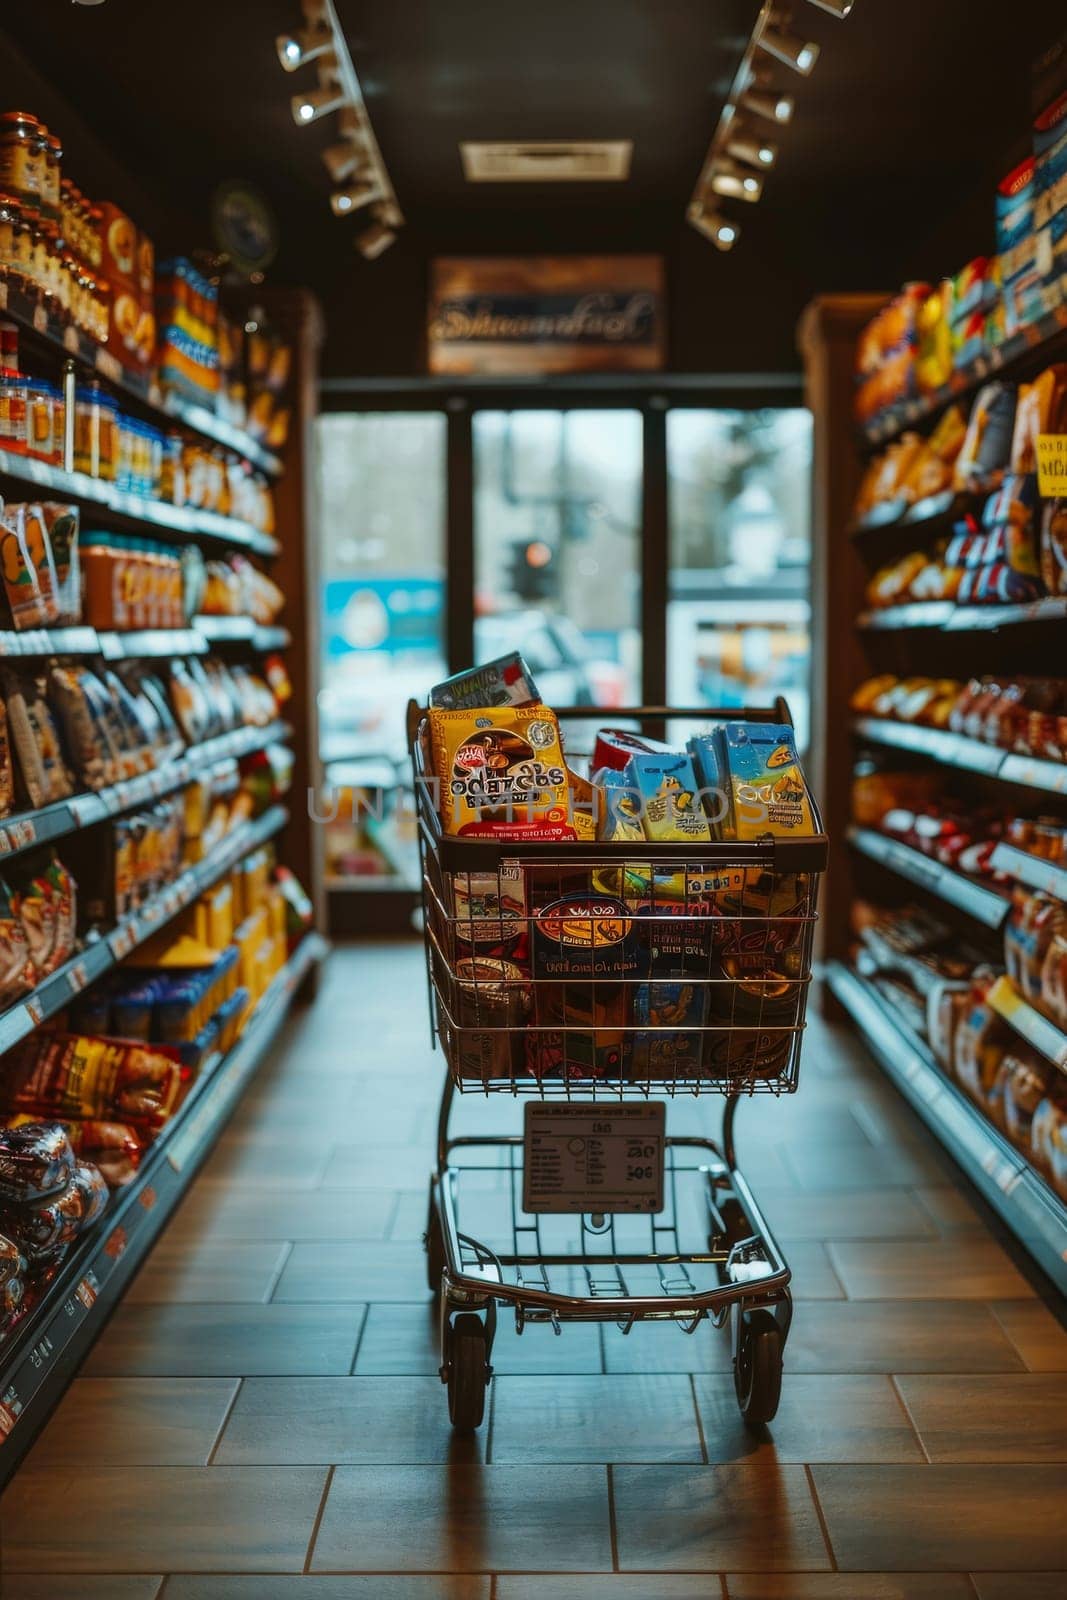 A shopping cart full of snacks is in a store aisle.